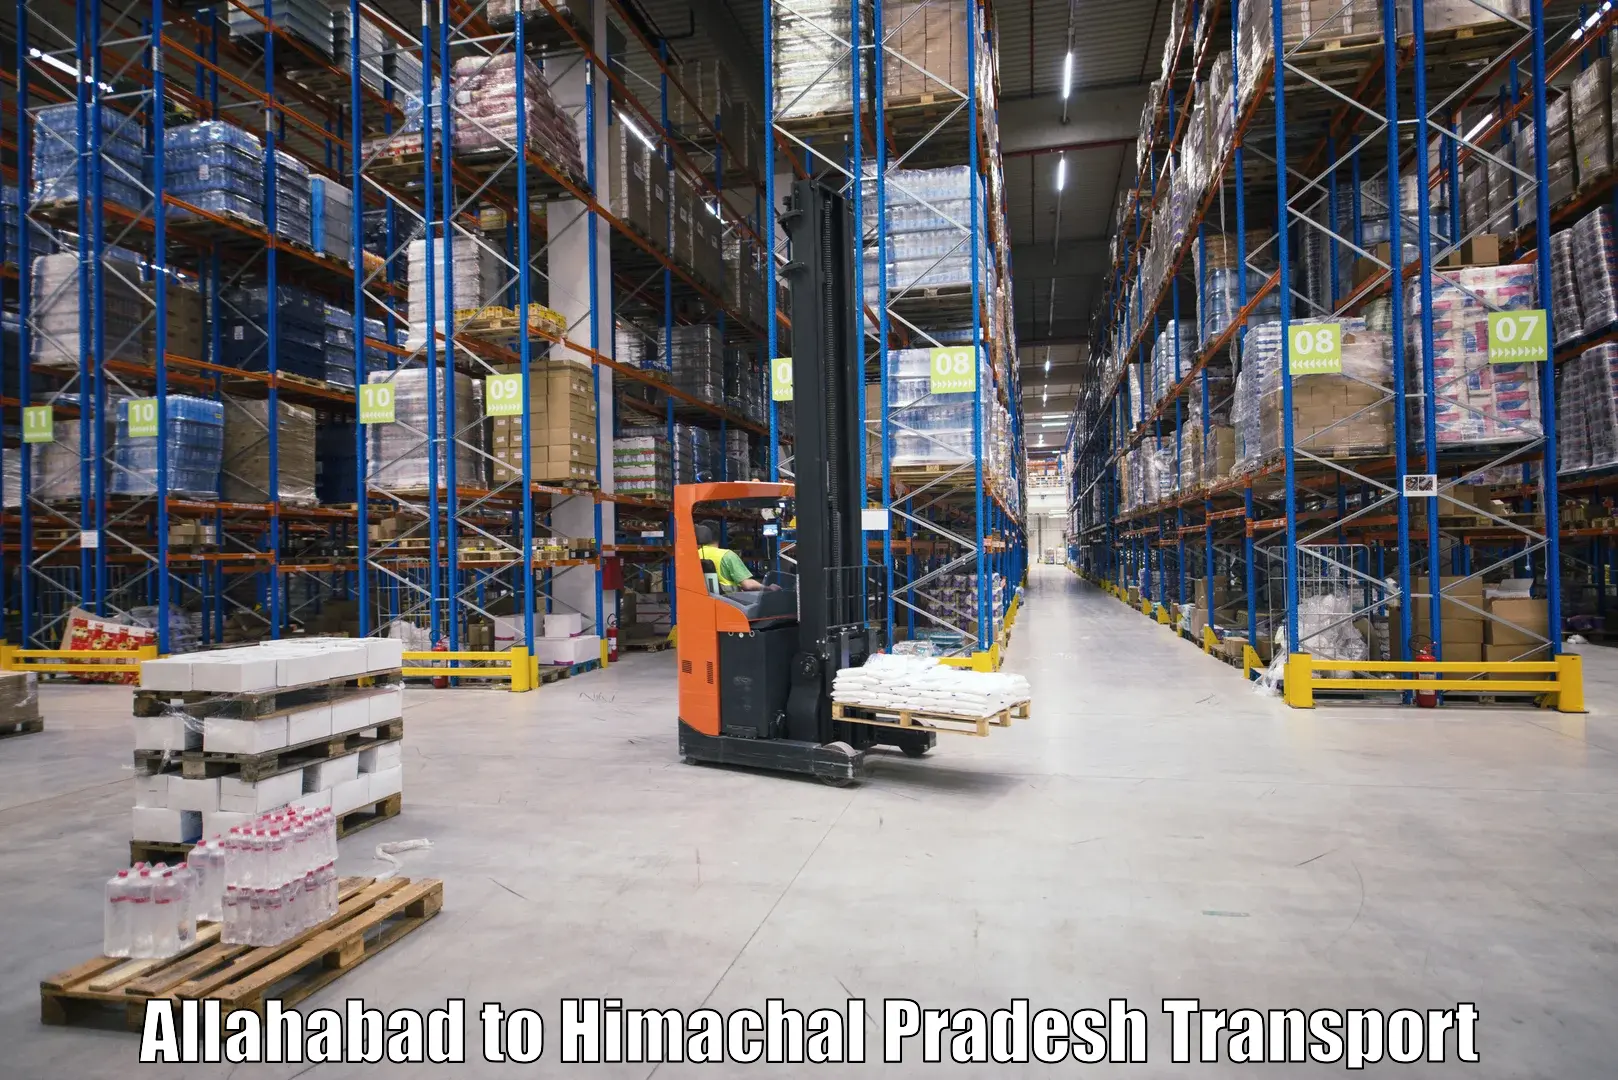 Truck transport companies in India Allahabad to Himachal Pradesh